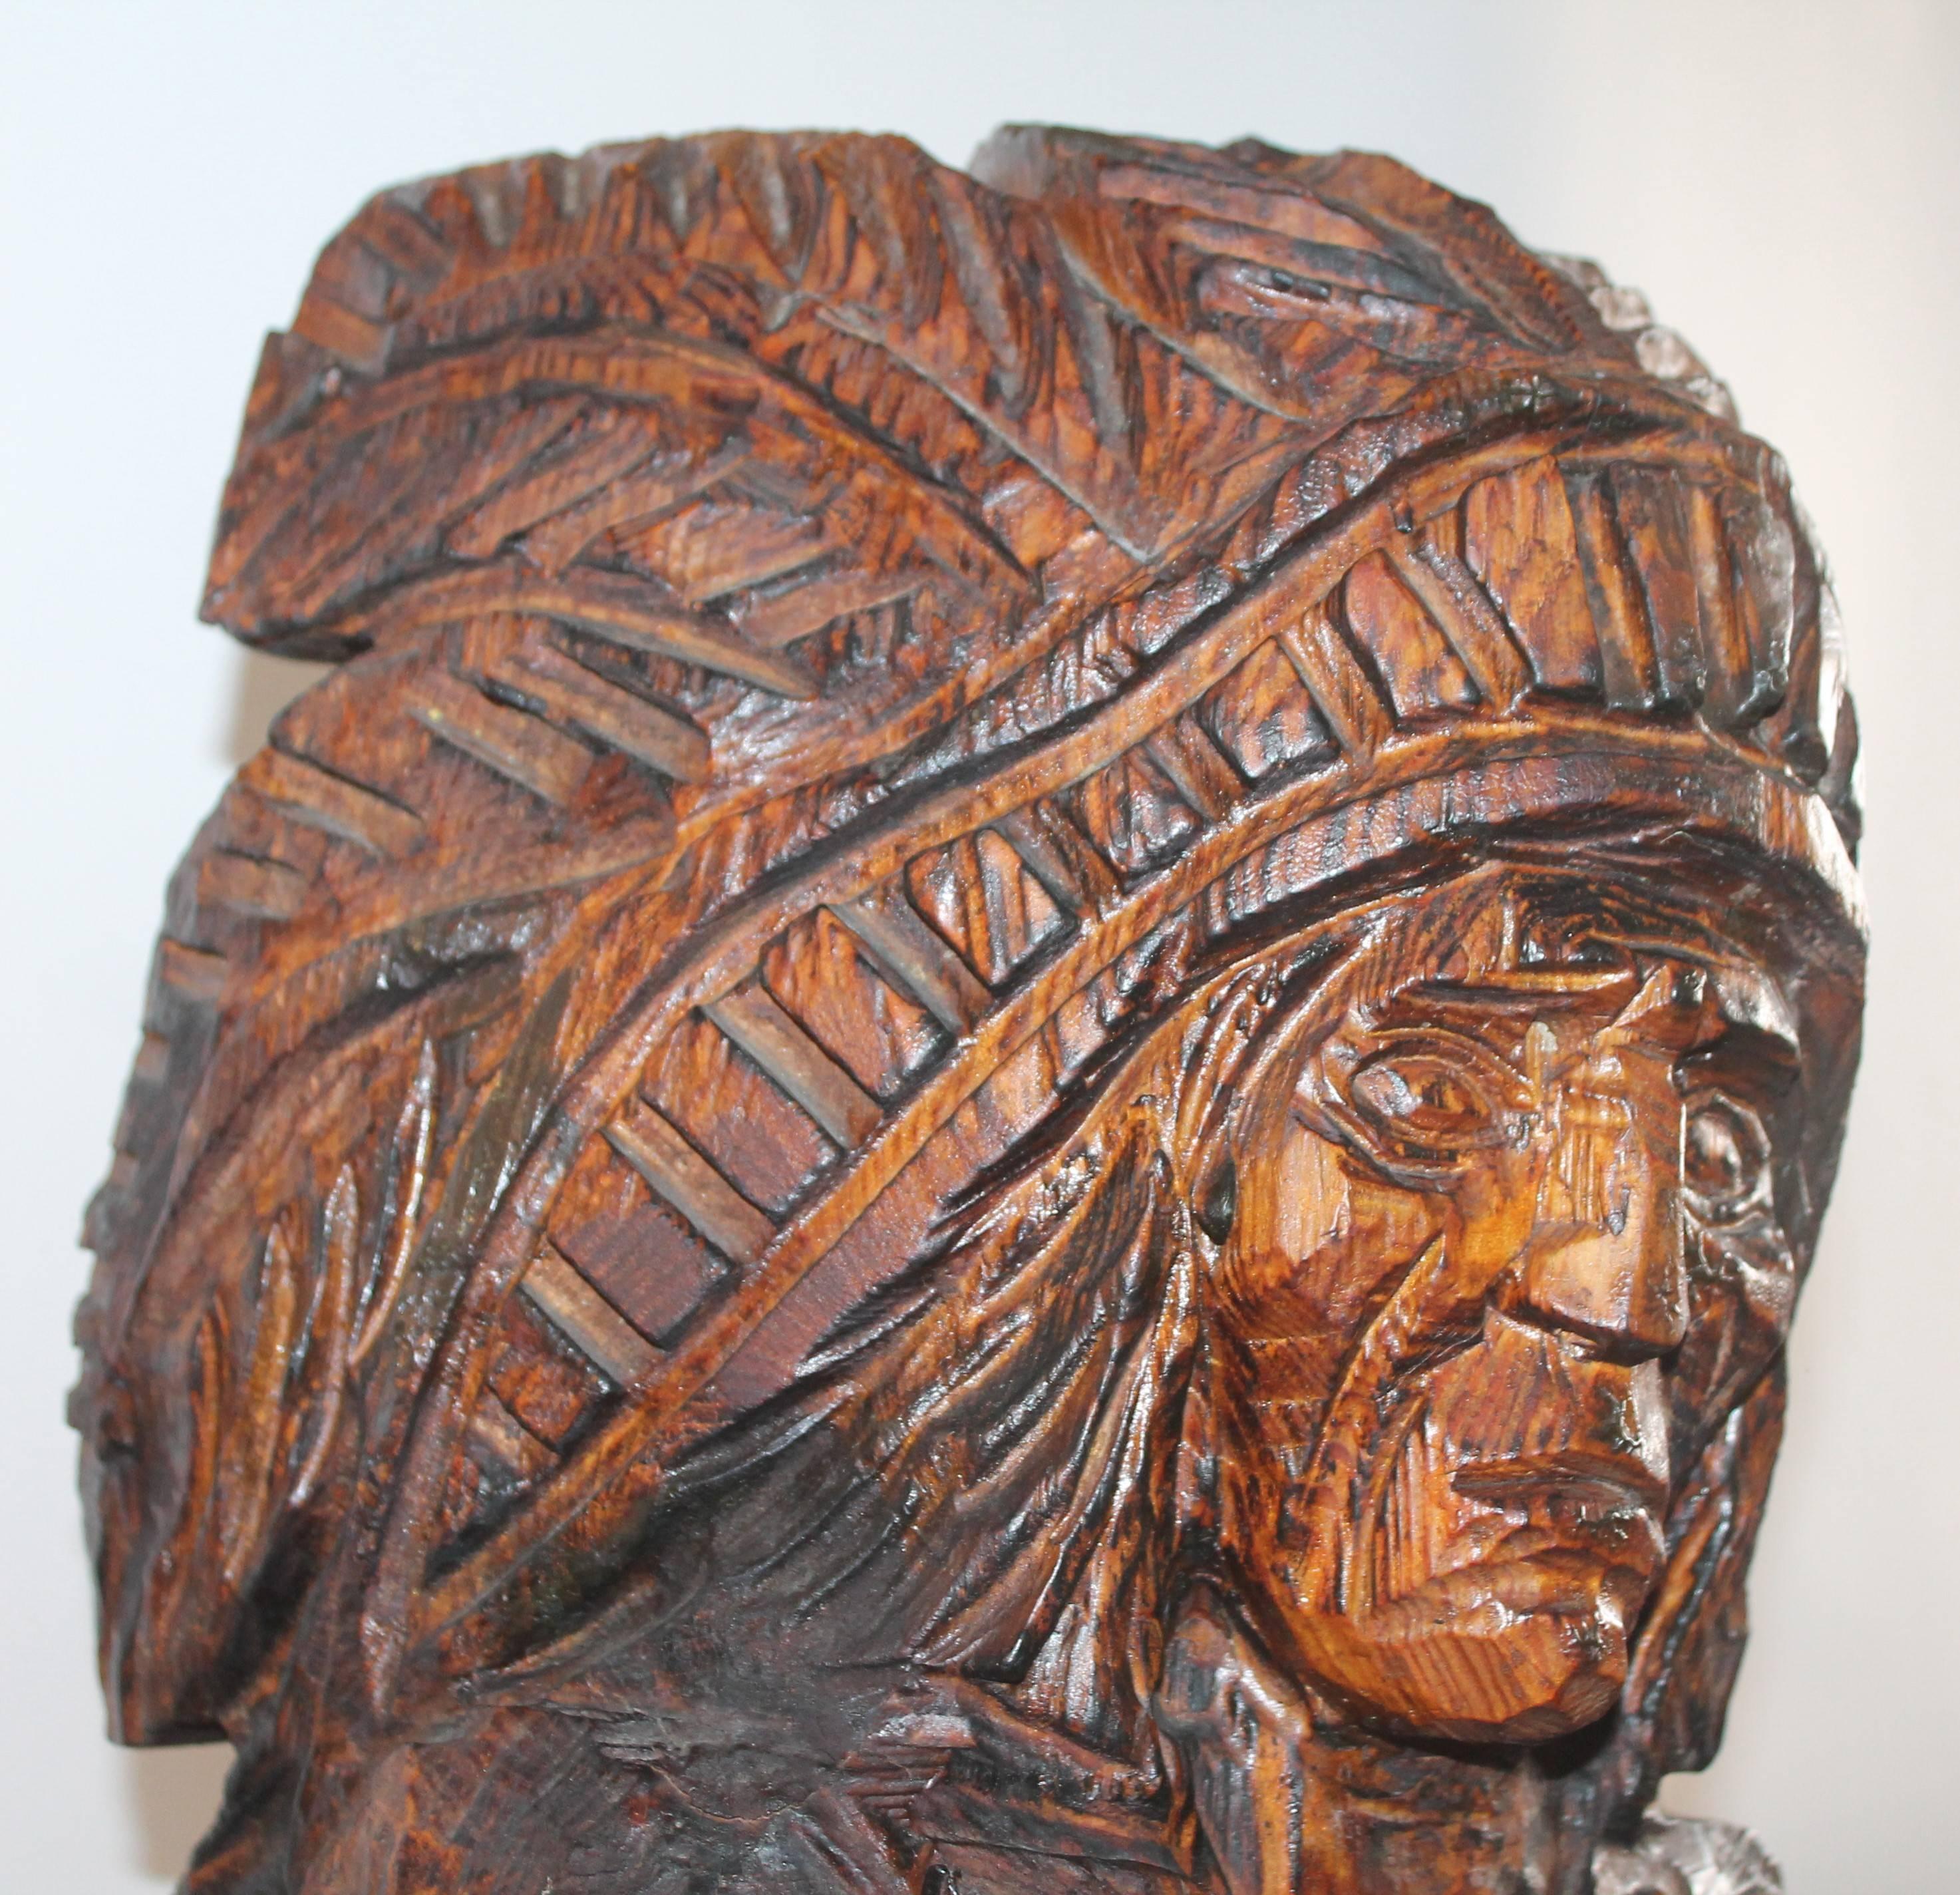 This fine hand-carved counter top cigar store Indian was found in New Mexico and has the original mess bag wrapped around his foot. The condition is good with minor cracks consistent from age and use. It has a wonderful mellow aged patina. Notice